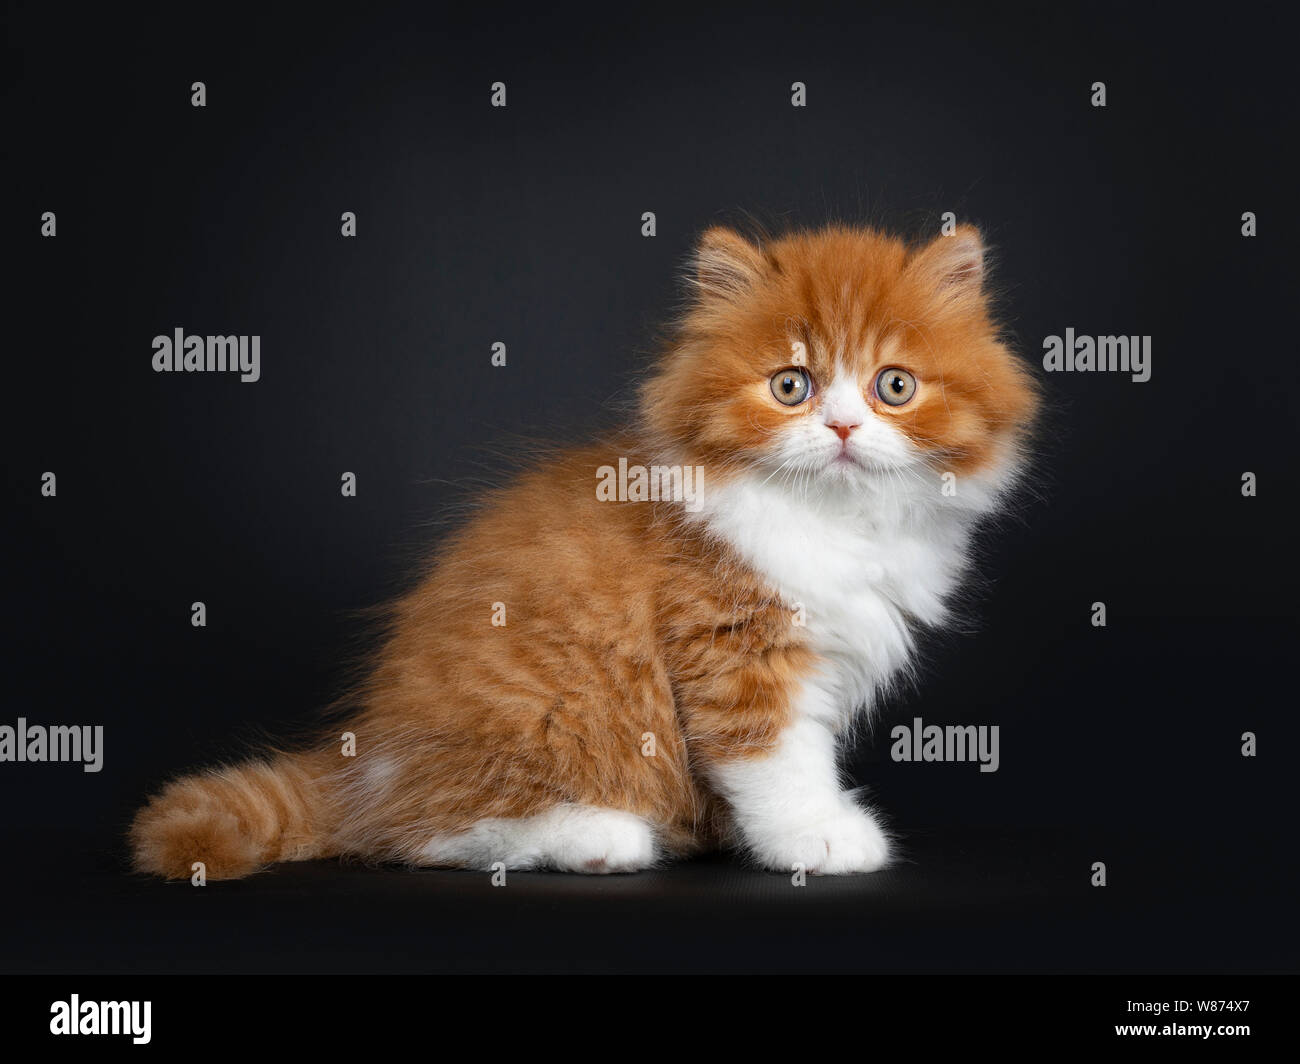 Adorable red with white British Longhair cat kitten, sitting side ways. Looking at camera with big round eyes. Isolated on black background. Stock Photo